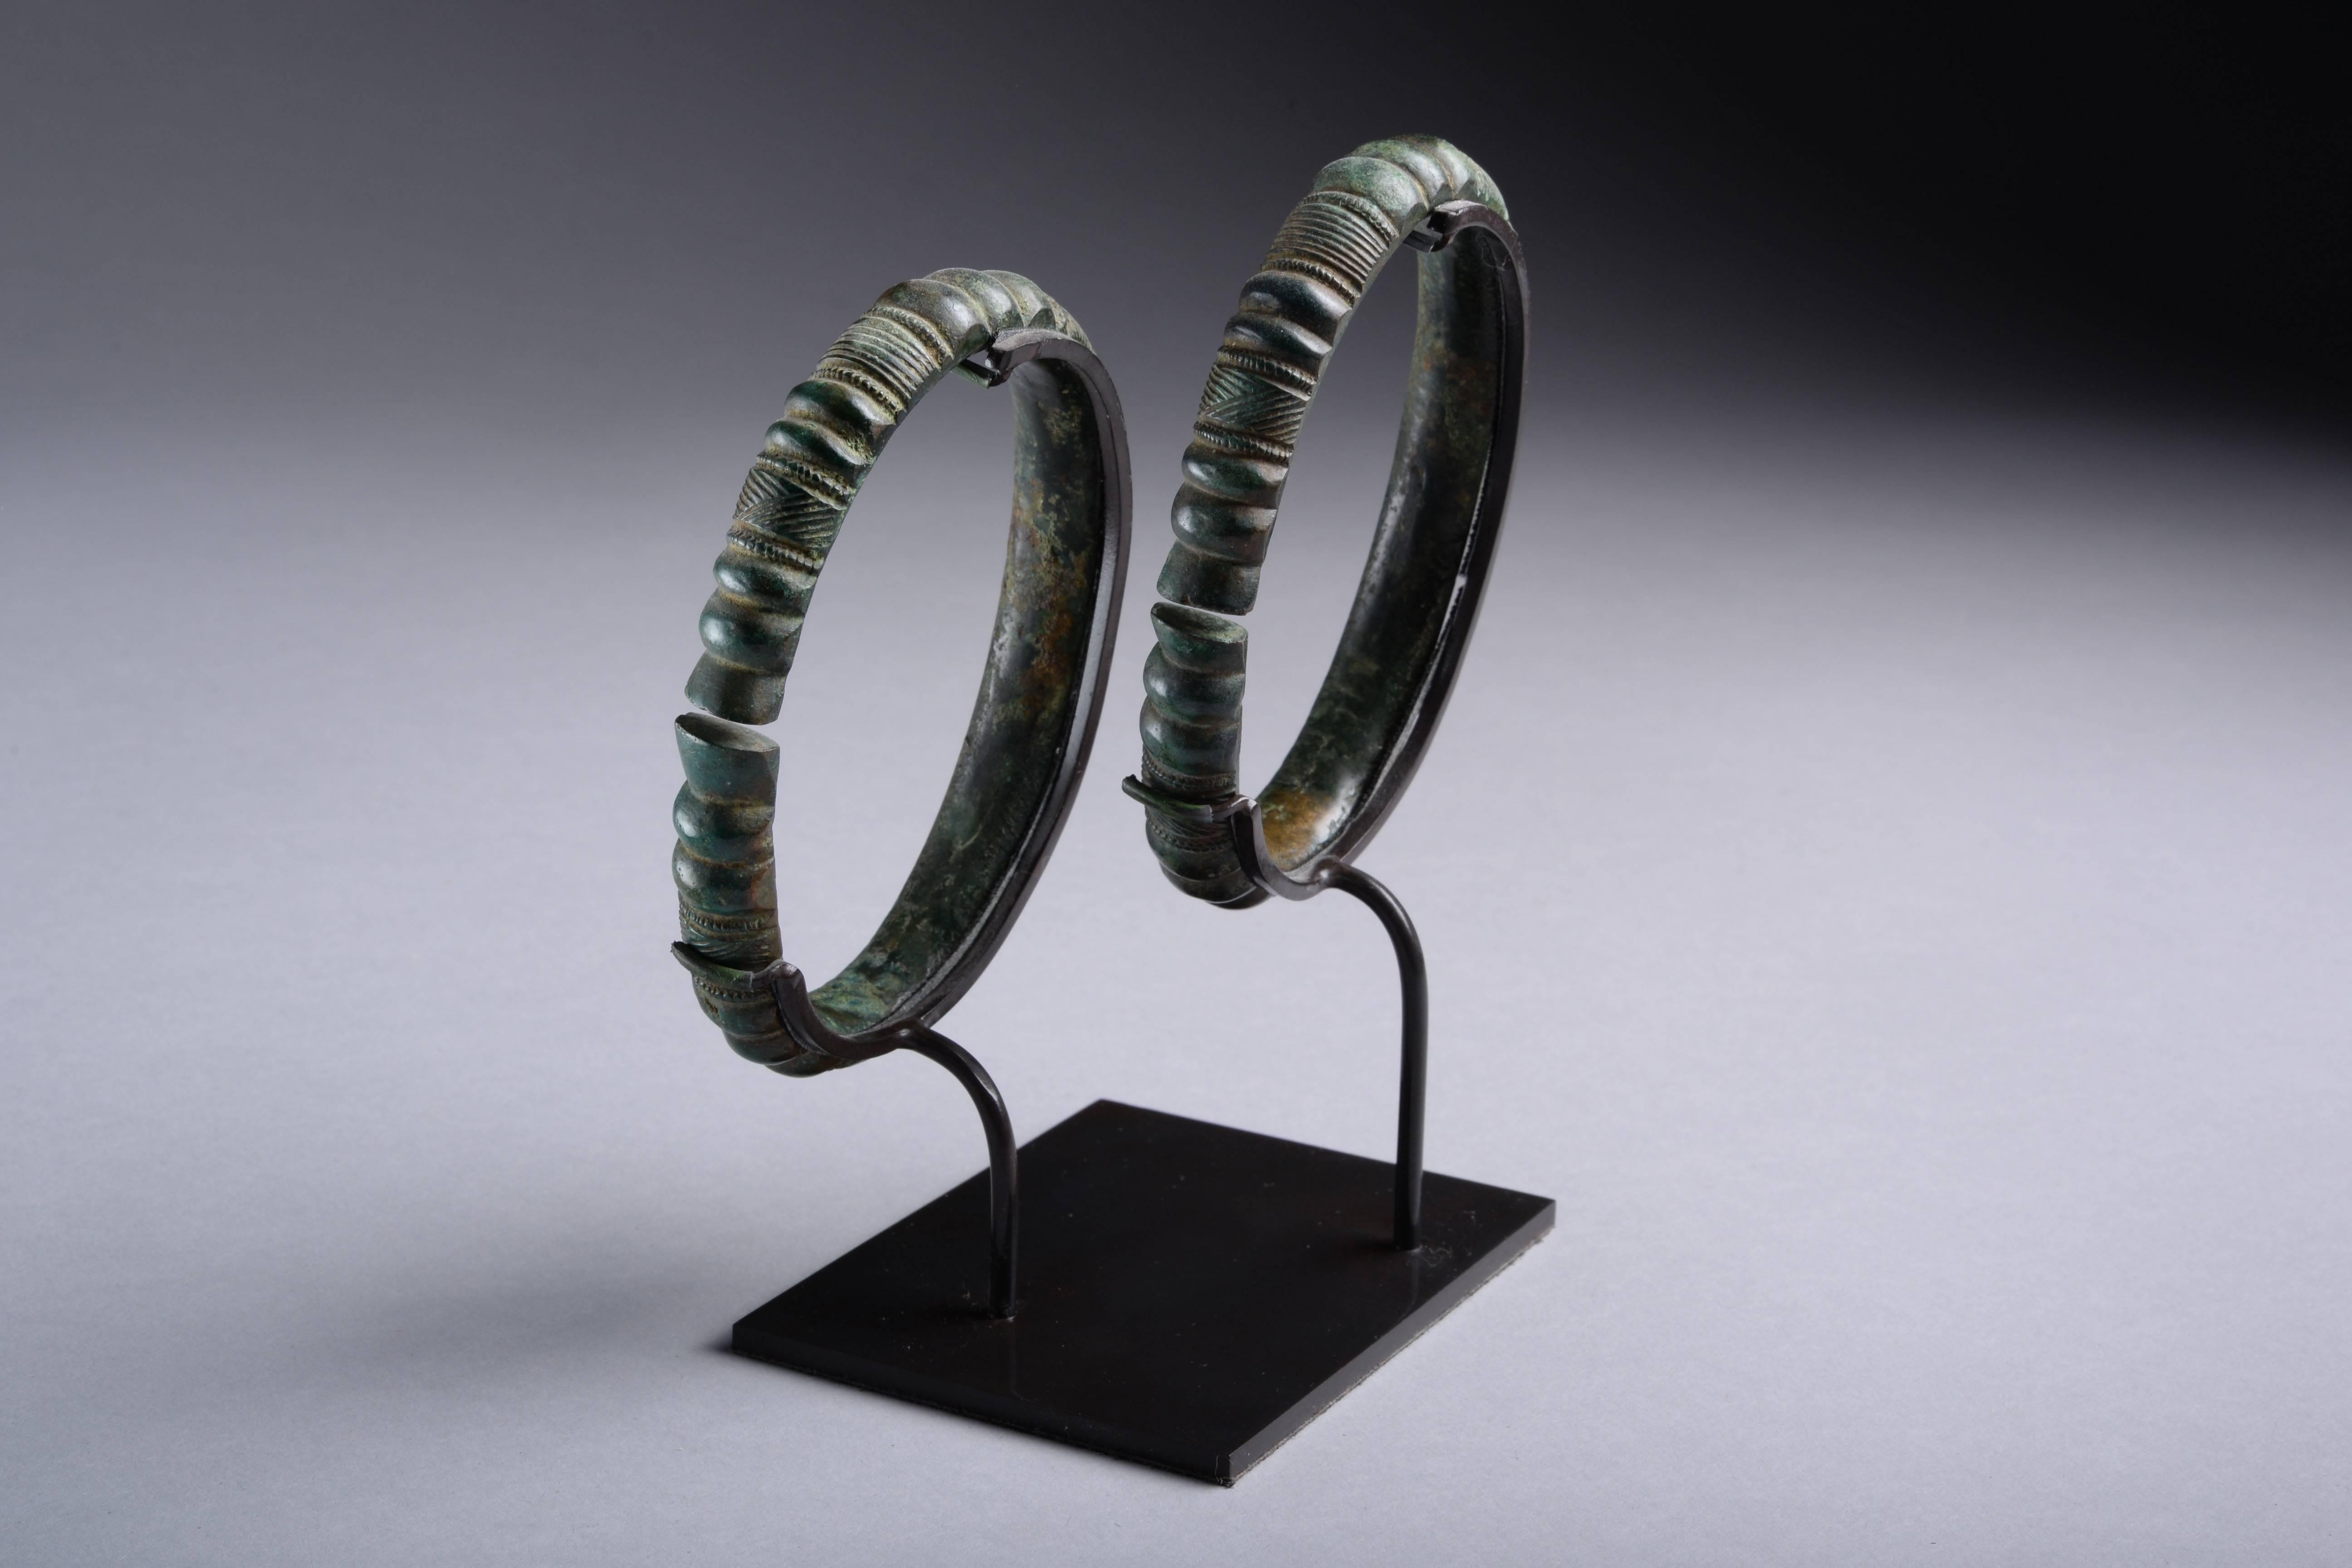 These beautiful European Iron Age bangles are exceptionally well manufactured and preserved. Dating to the Hallstatt period (9th - 7th century BC).

With an attractive dark green patina and decorated in confident style with simple lobes and